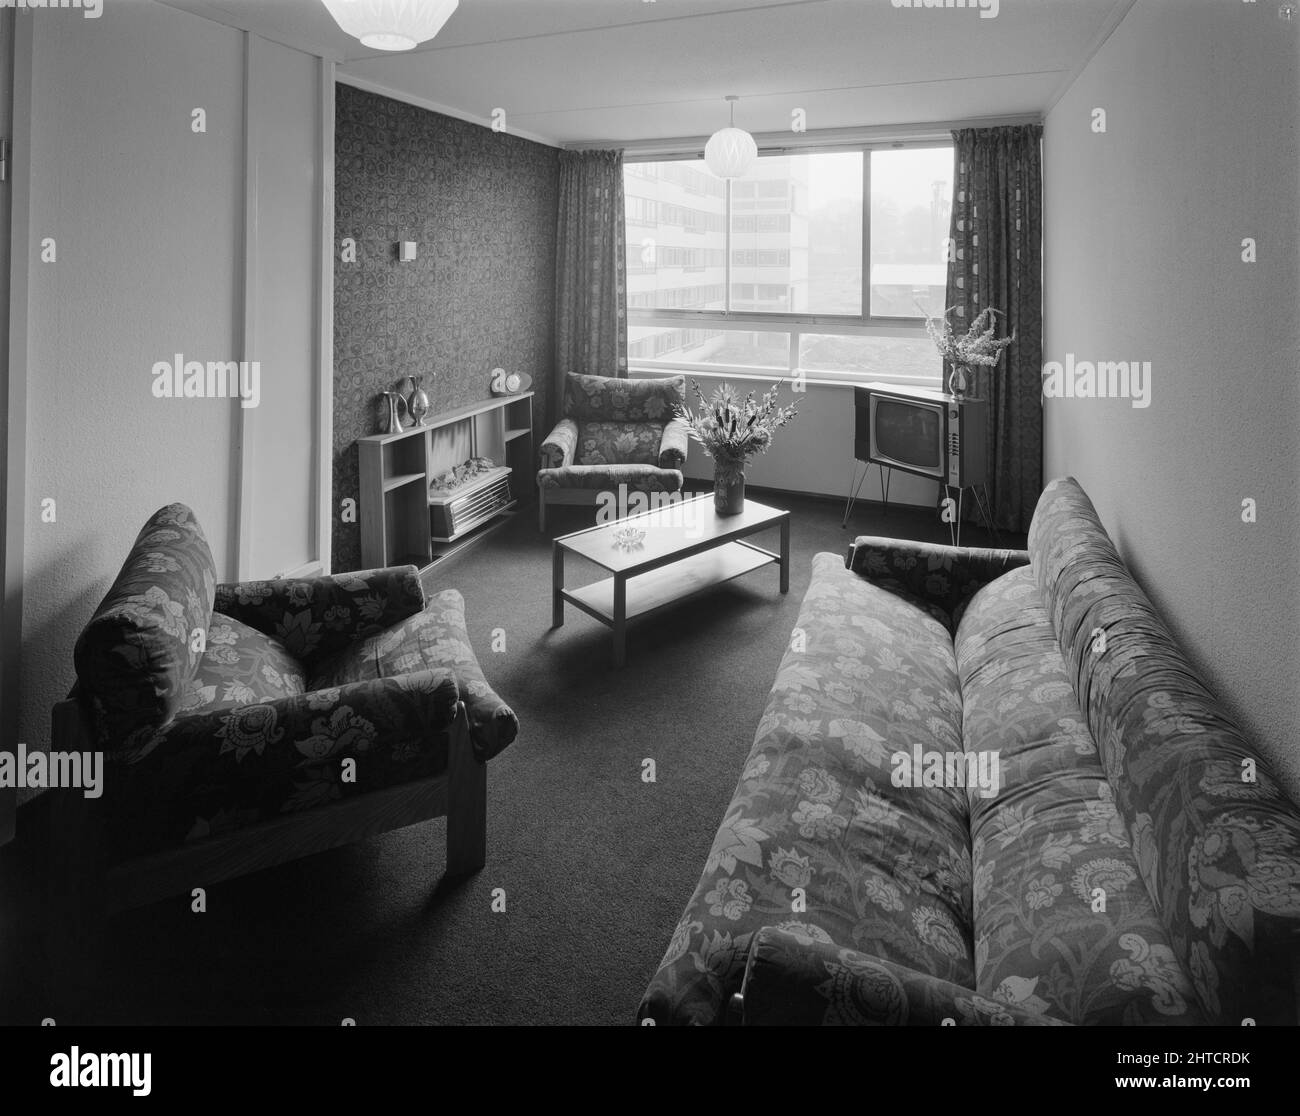 Victoria Park Estate, Macclesfield, Cheshire East, Cheshire, 18/04/1968. The living room of a flat at the Victoria Park development, built using the 12M Jespersen system. In 1963, John Laing and Son Ltd bought the rights to the Danish industrialised building system for flats known as Jespersen (sometimes referred to as Jesperson). The company built factories in Scotland, Hampshire and Lancashire producing Jespersen prefabricated parts and precast concrete panels, allowing the building of housing to be rationalised, saving time and money. The Victoria Park development in Macclesfield, lying bet Stock Photo